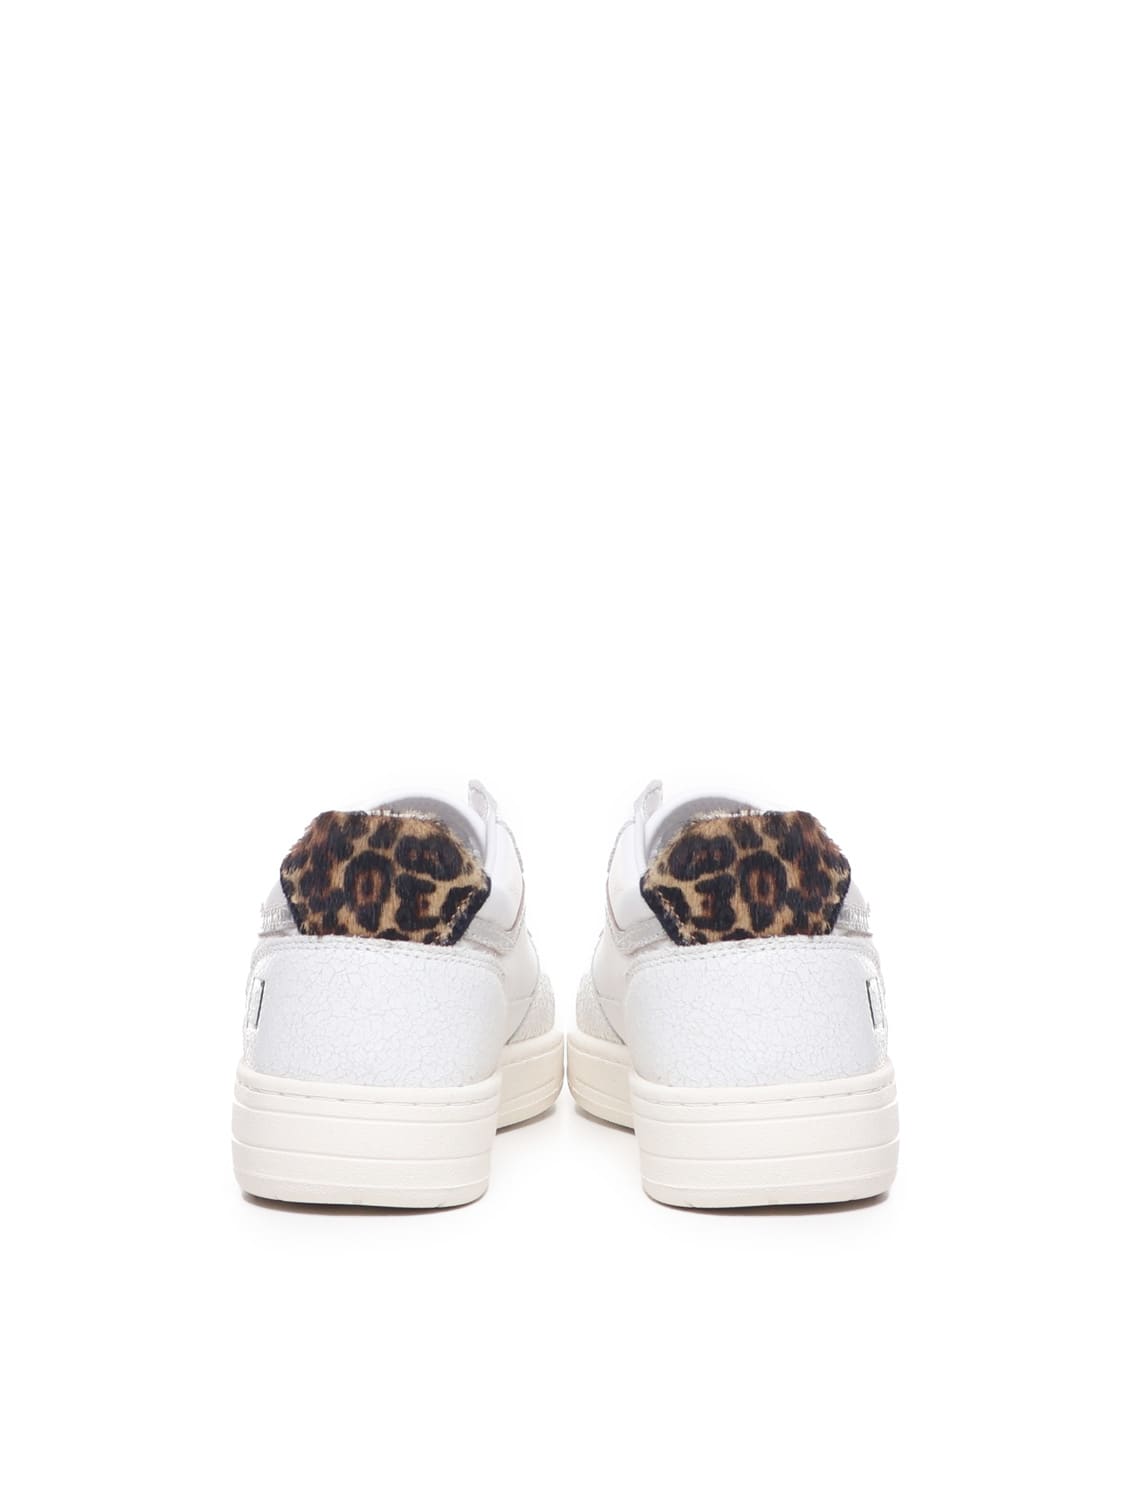 Shop Date Court 2.0 Sneakers In White-leopard